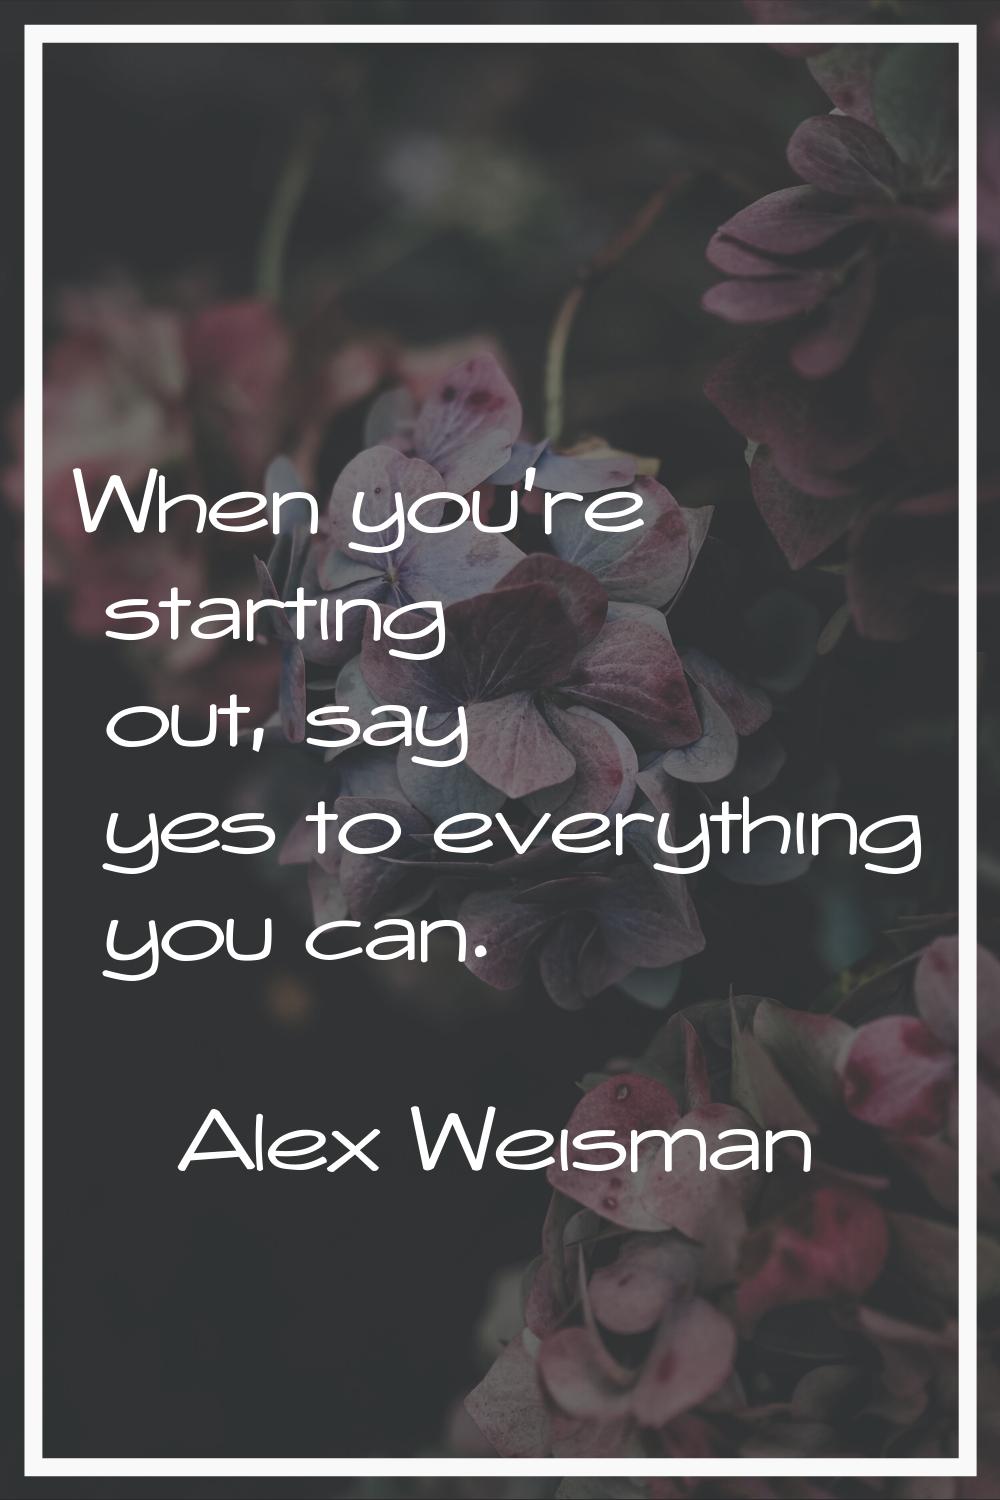 When you're starting out, say yes to everything you can.